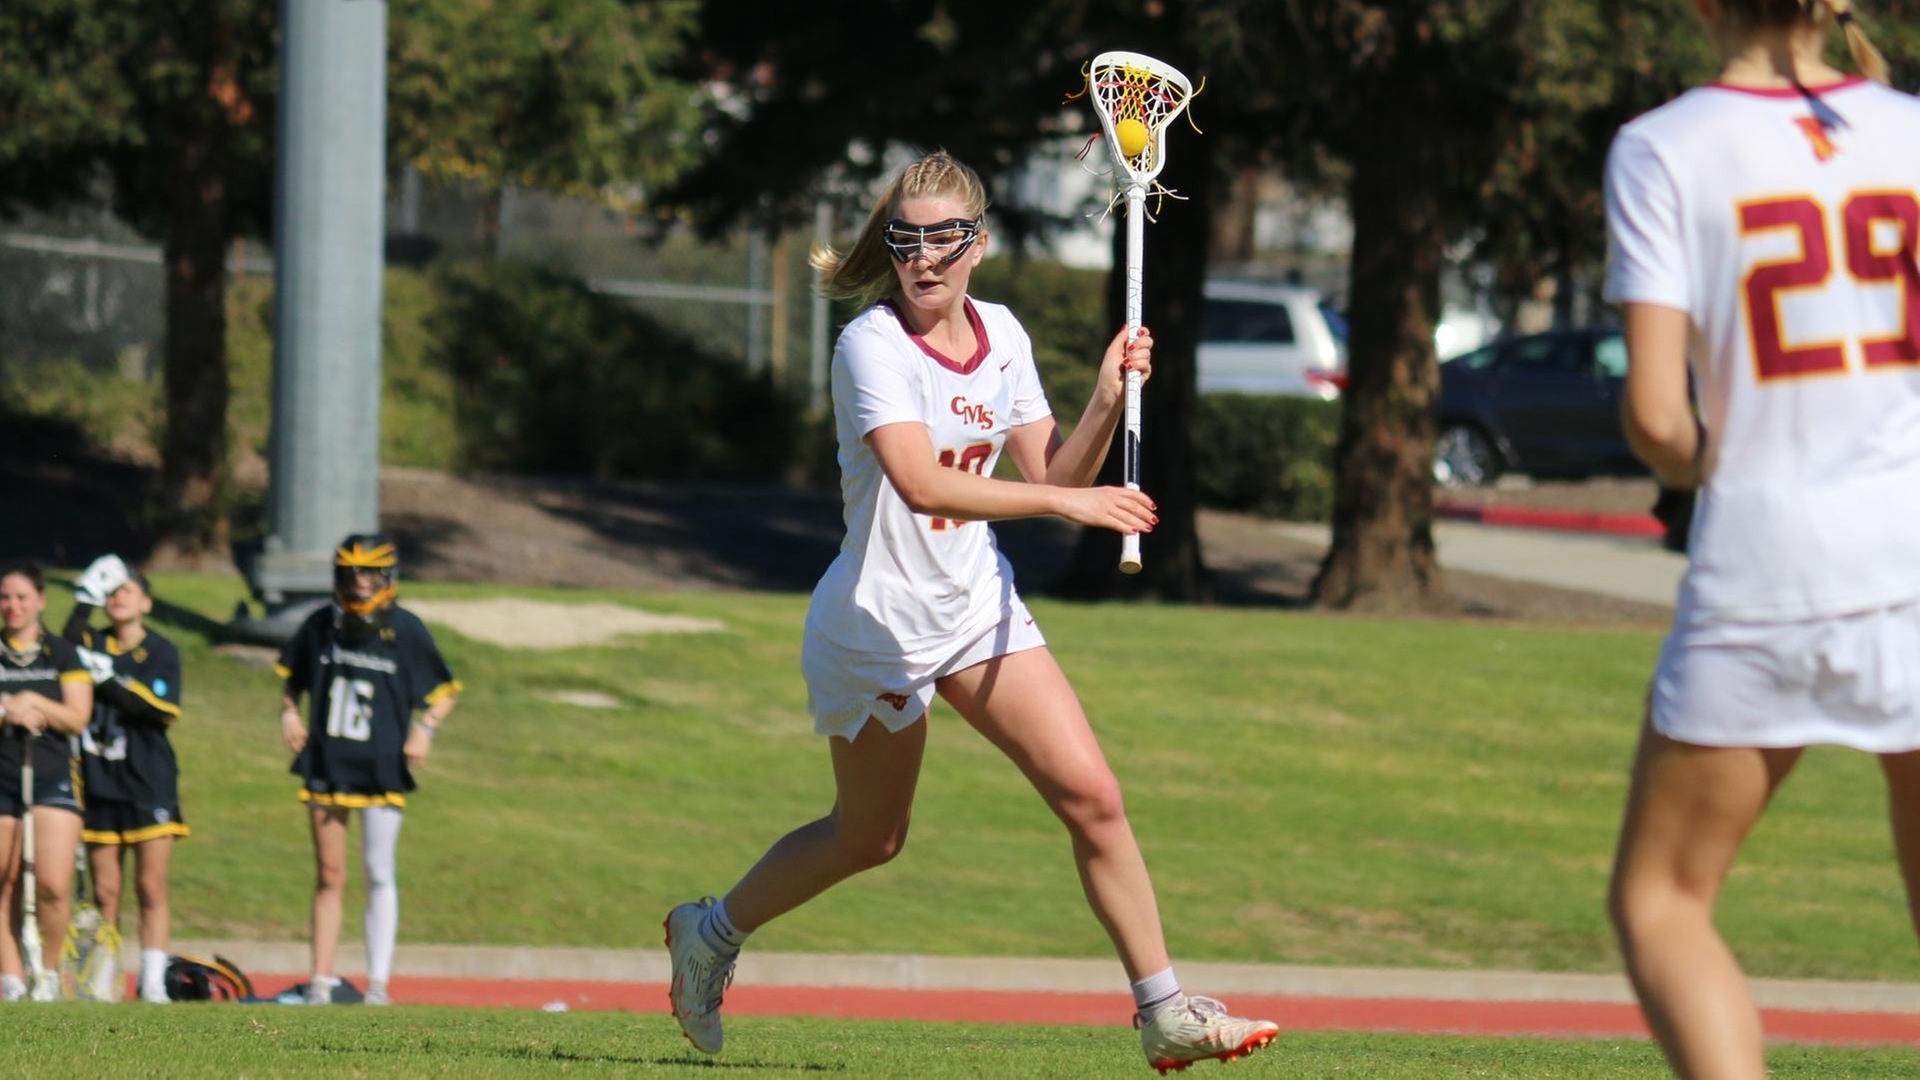 Taylor Daetz had three goals and two assists for the Athenas